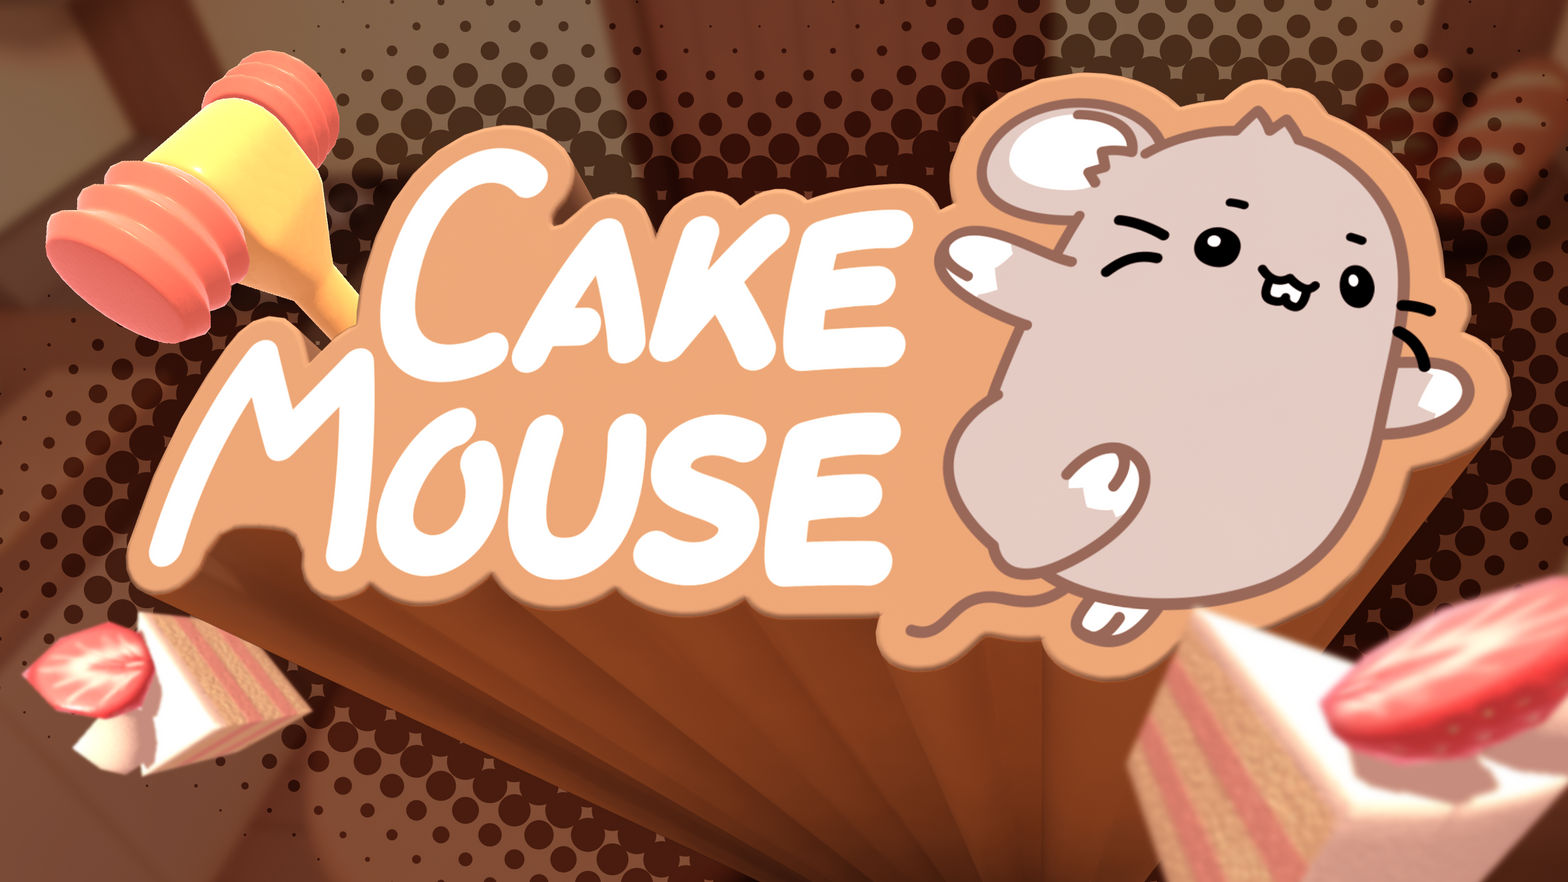 Cake Mouse